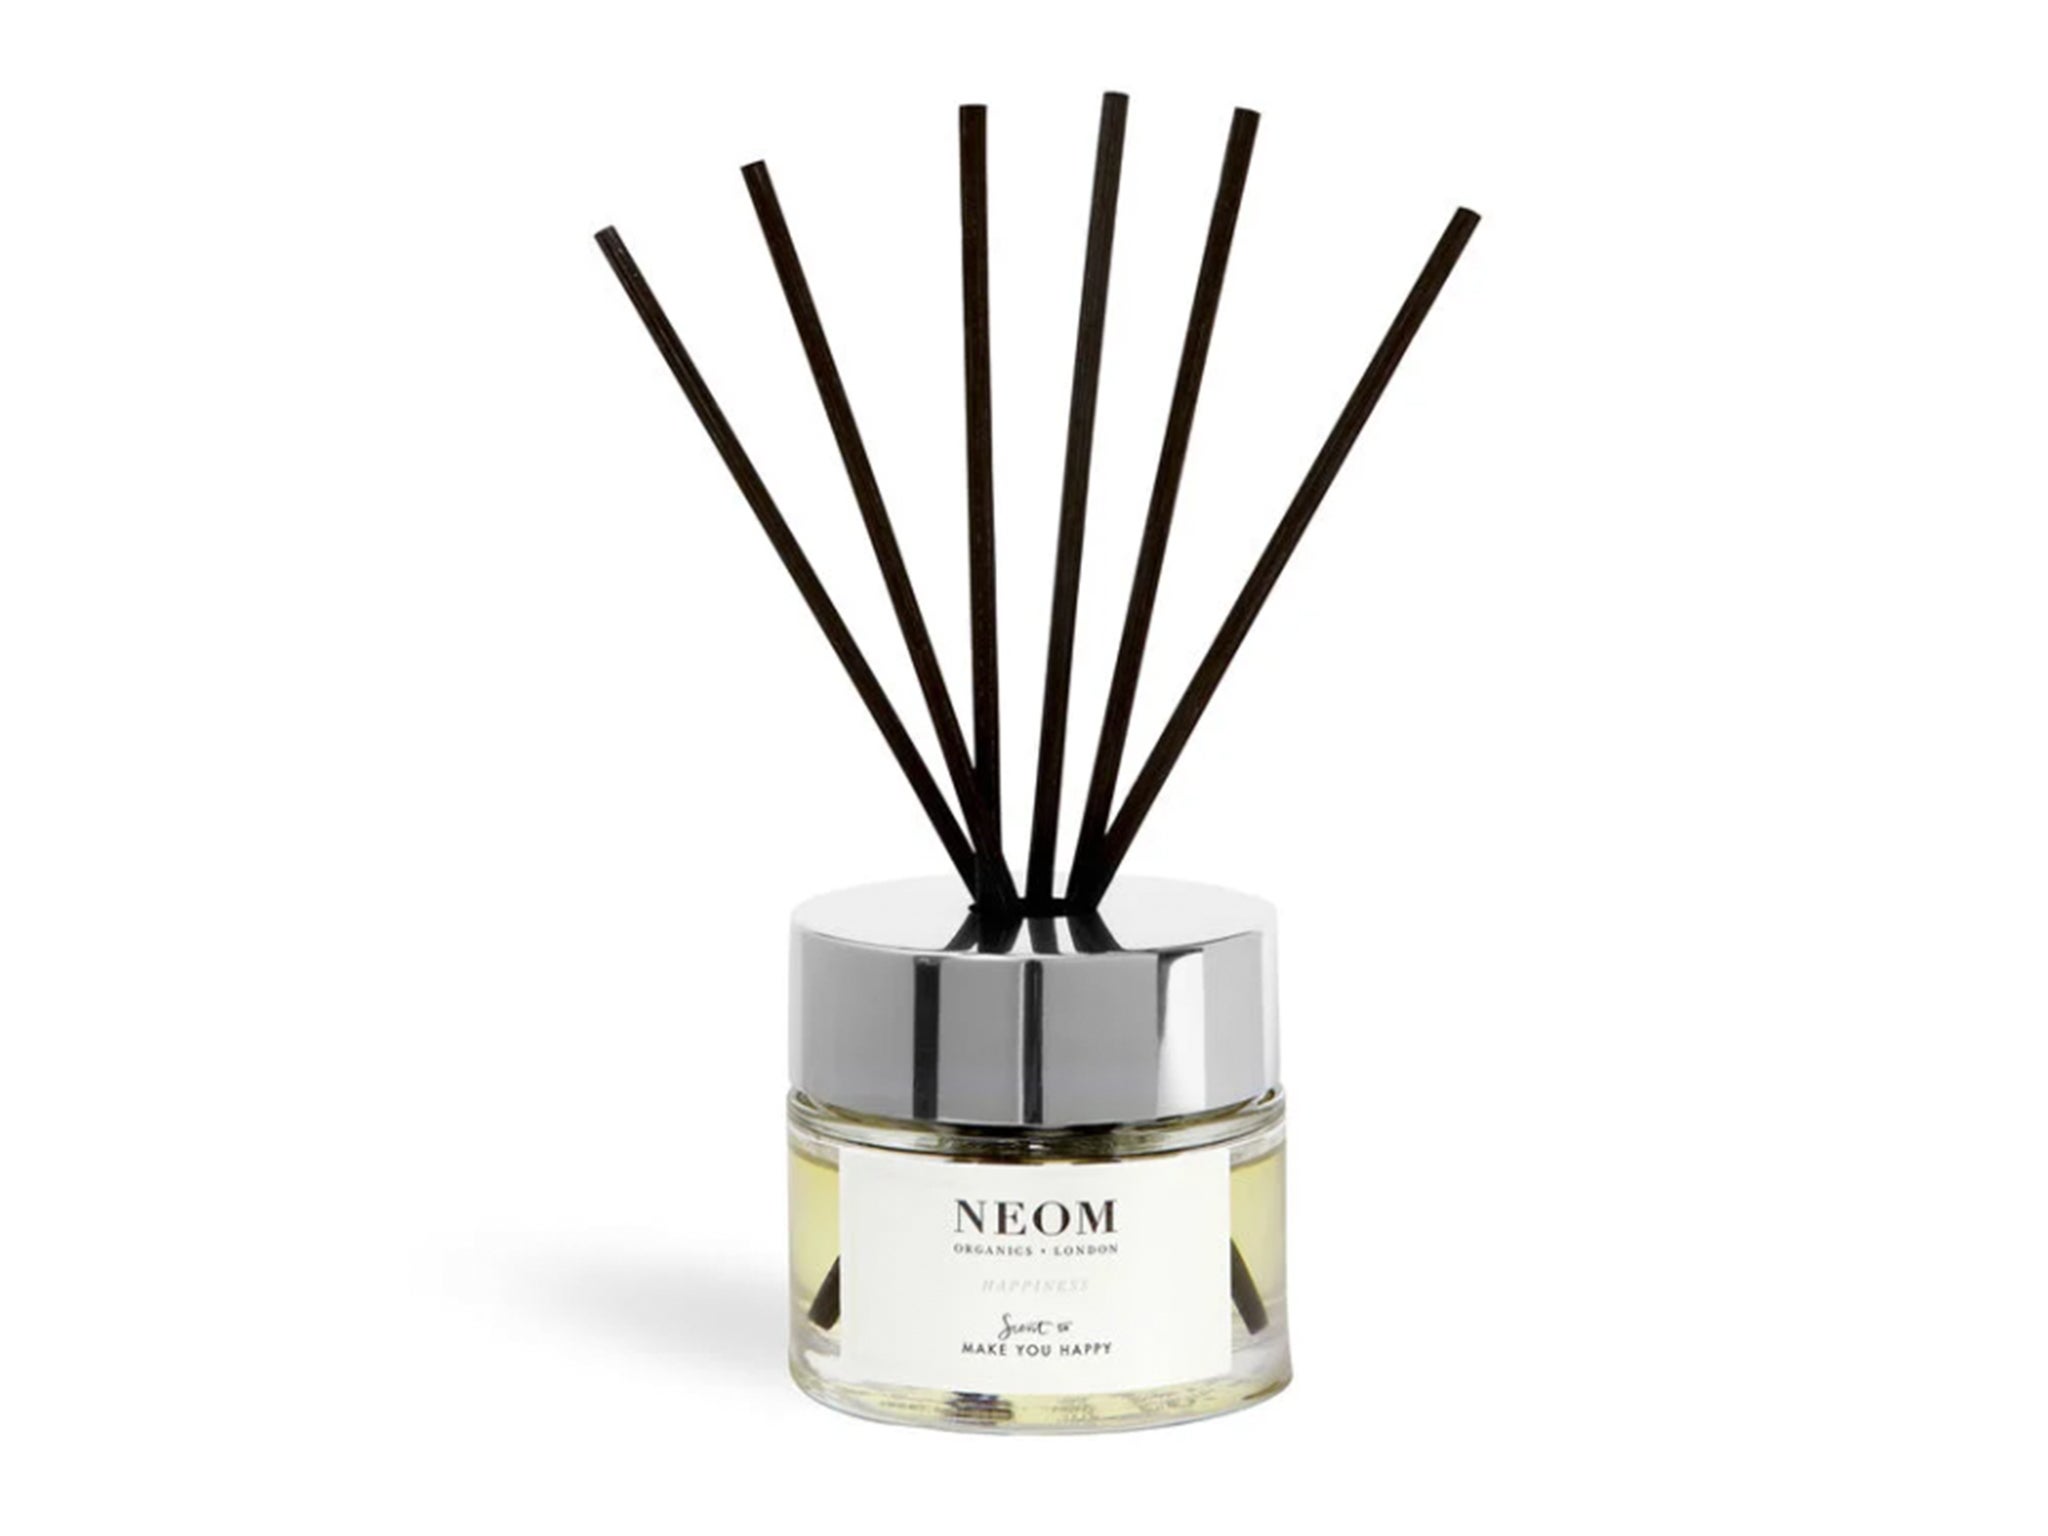 Space NK Neom diffuser